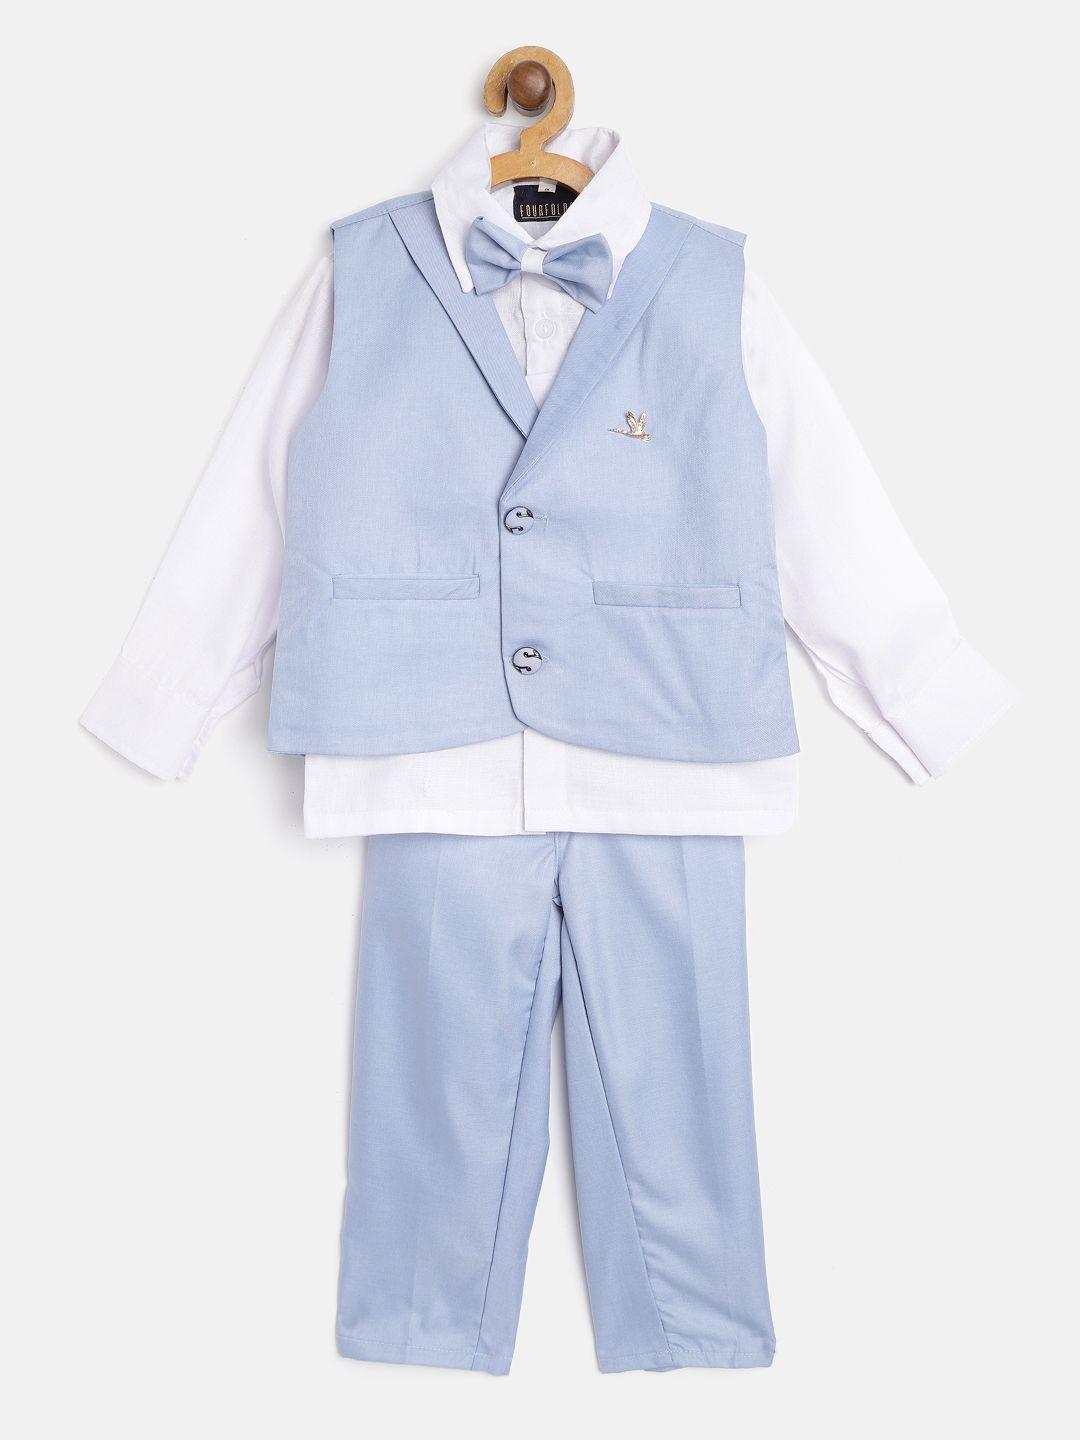 fourfolds-boys-white-&-blue-solid-clothing-set-with-waistcoat-&-bow-tie